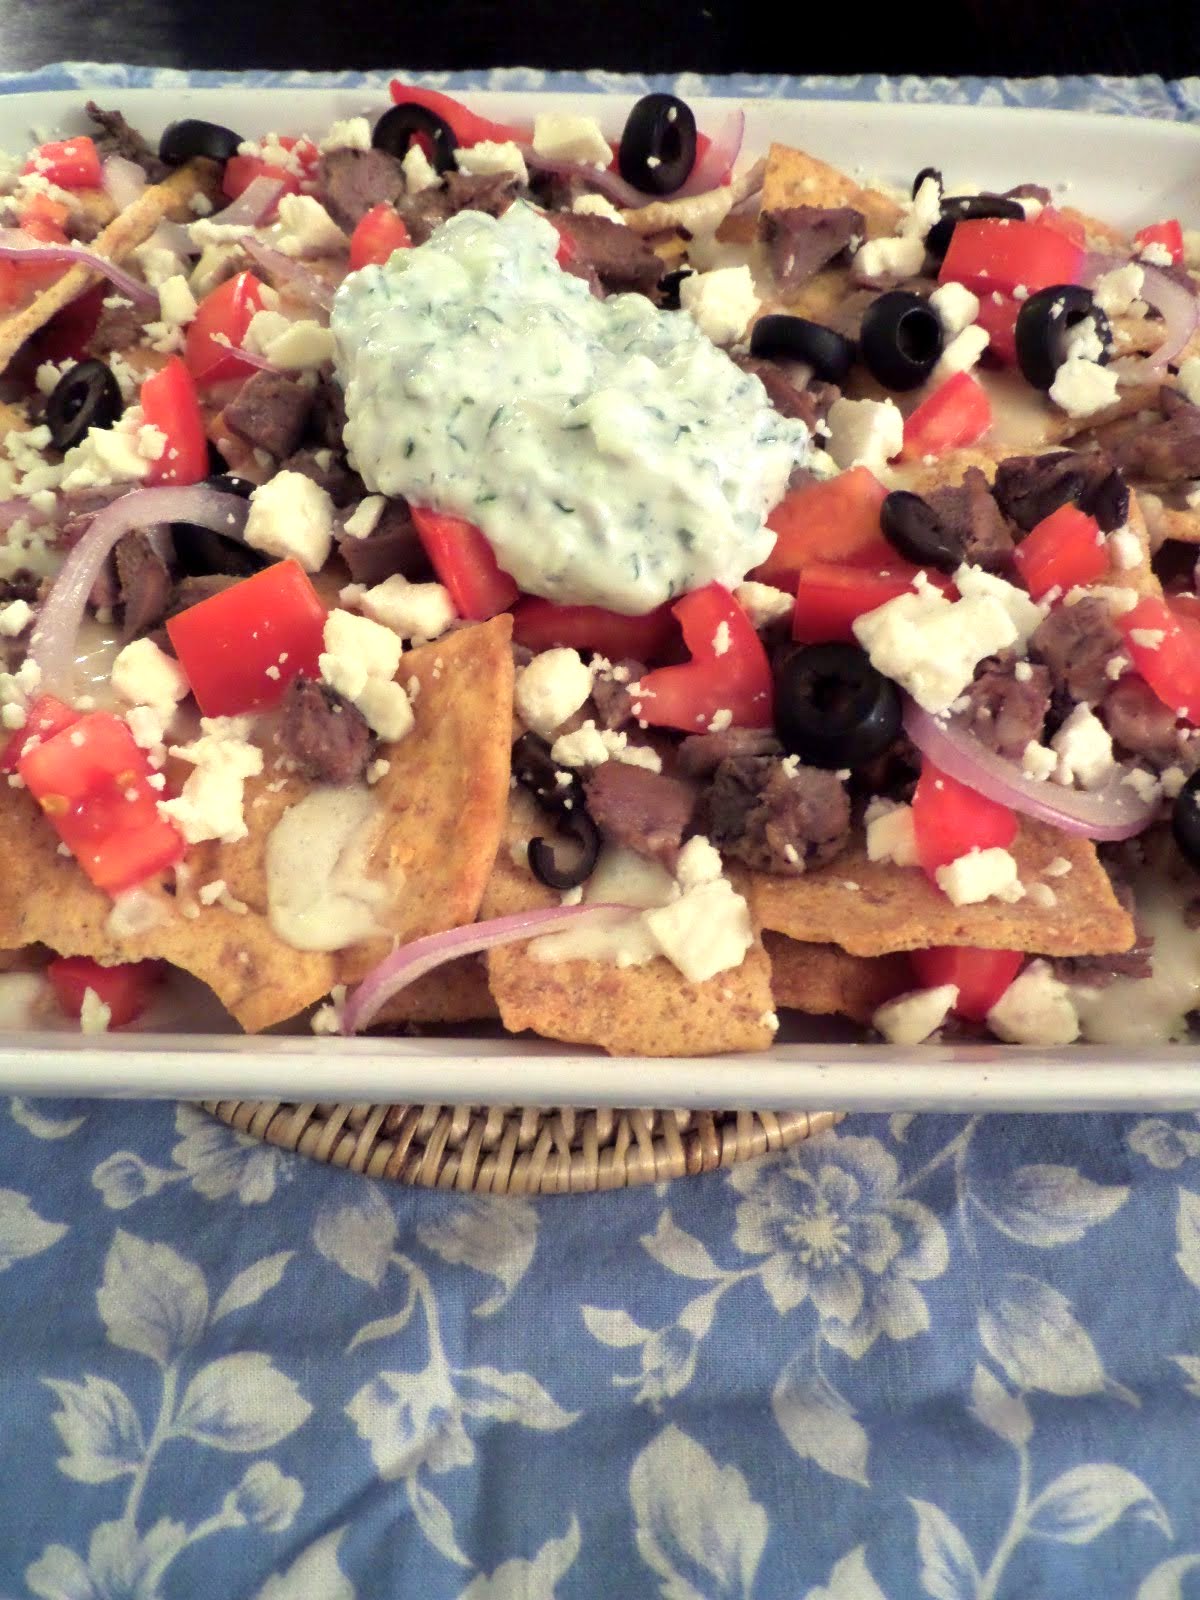 Greek Nachos:  Nachos with a Greek twist.  Pita chips topped with lamb, olives, tomatoes, and feta.